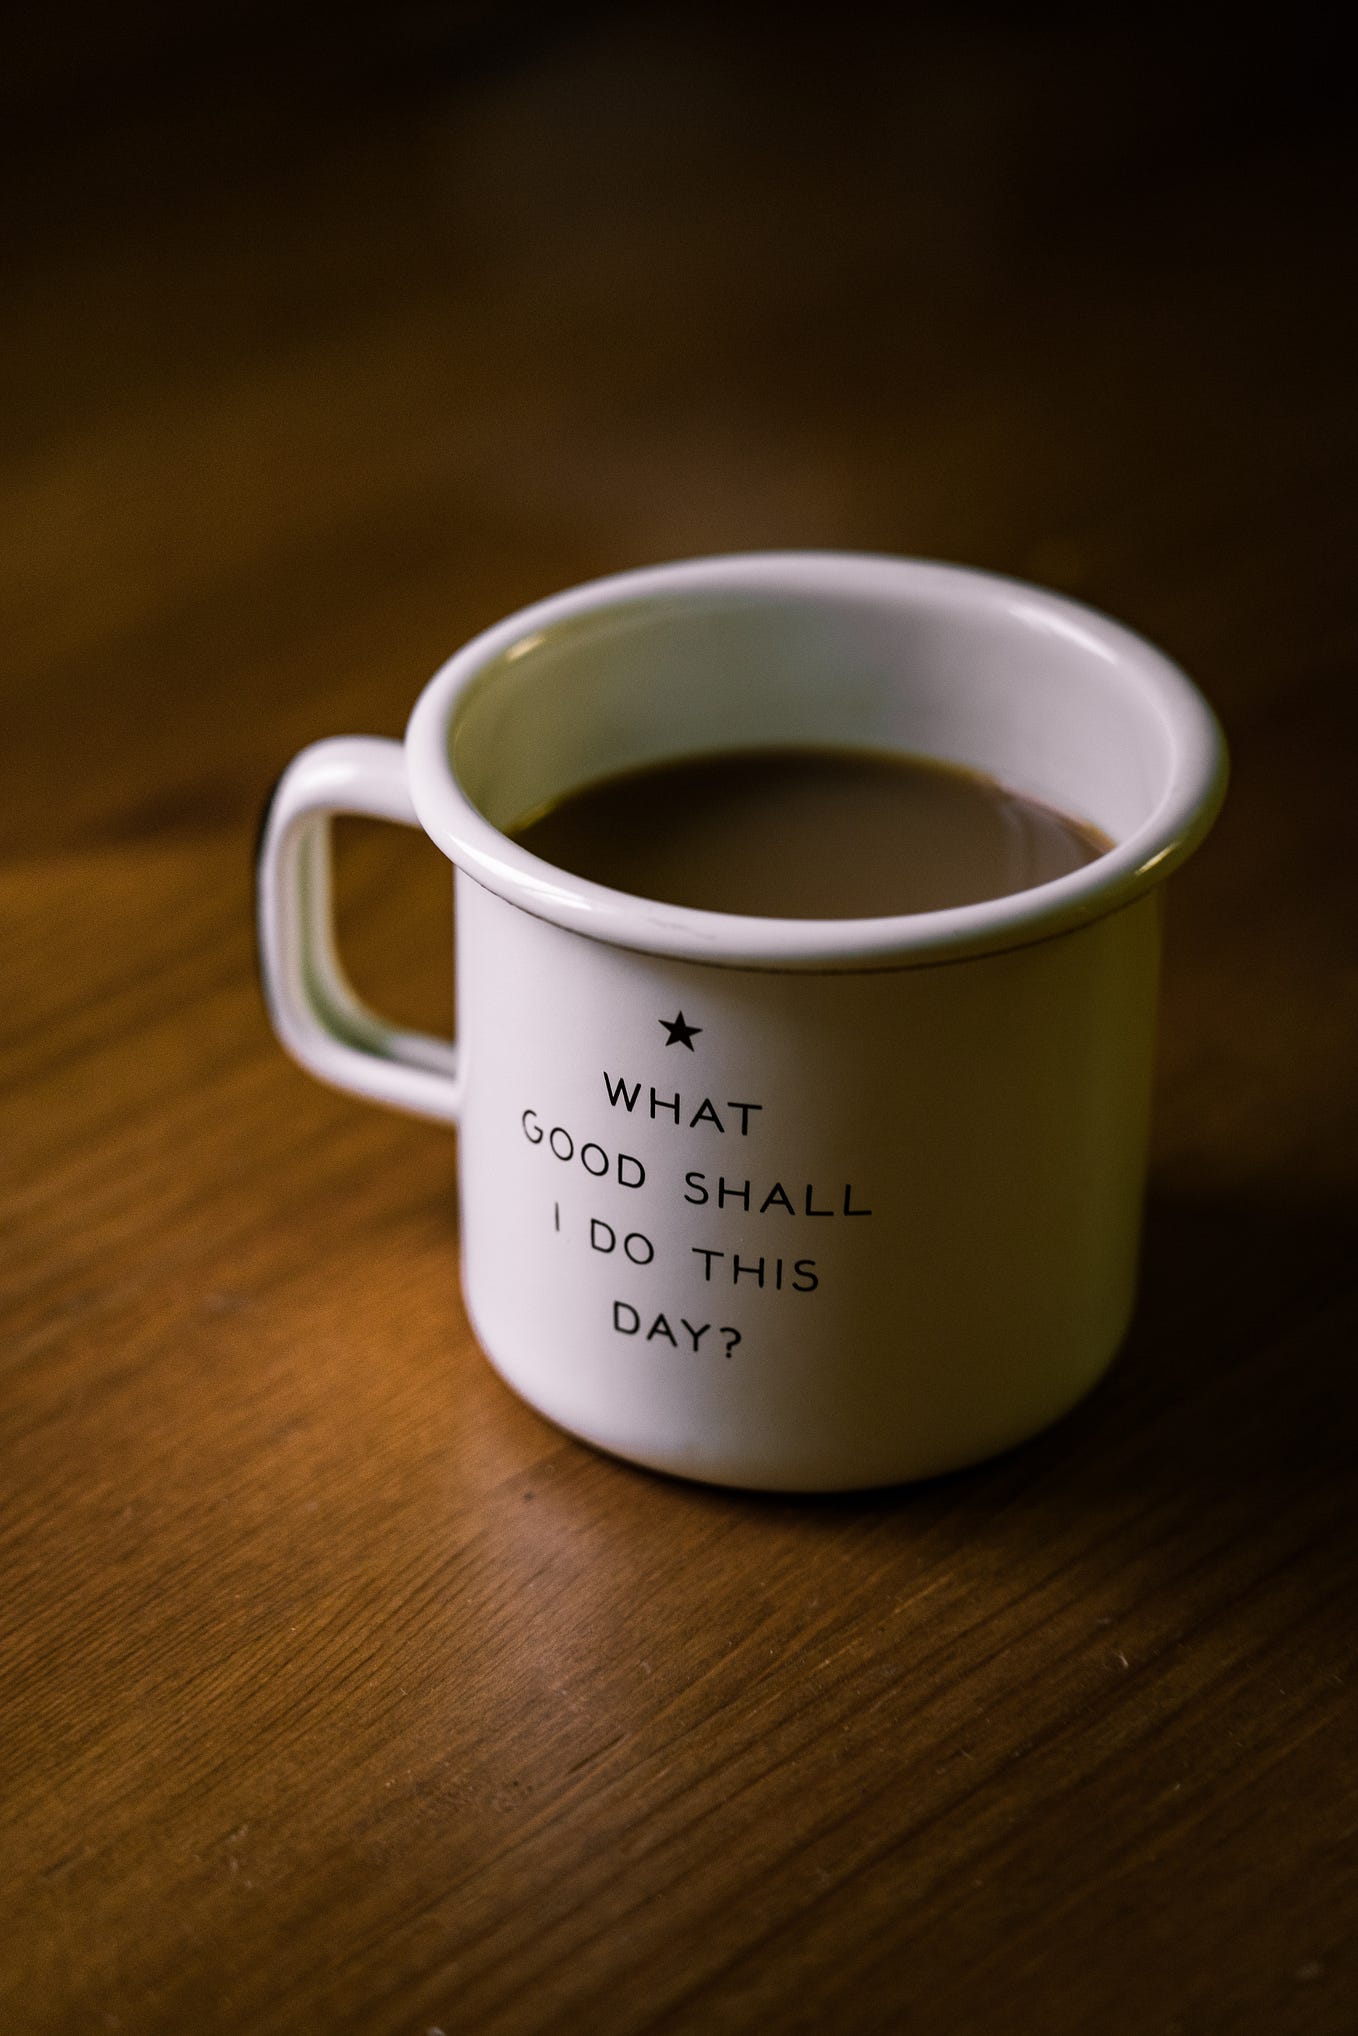 A white coffee mug with the handle on the left side. Wording on the coffee mug states, “What Good Shall I Do This Day?”